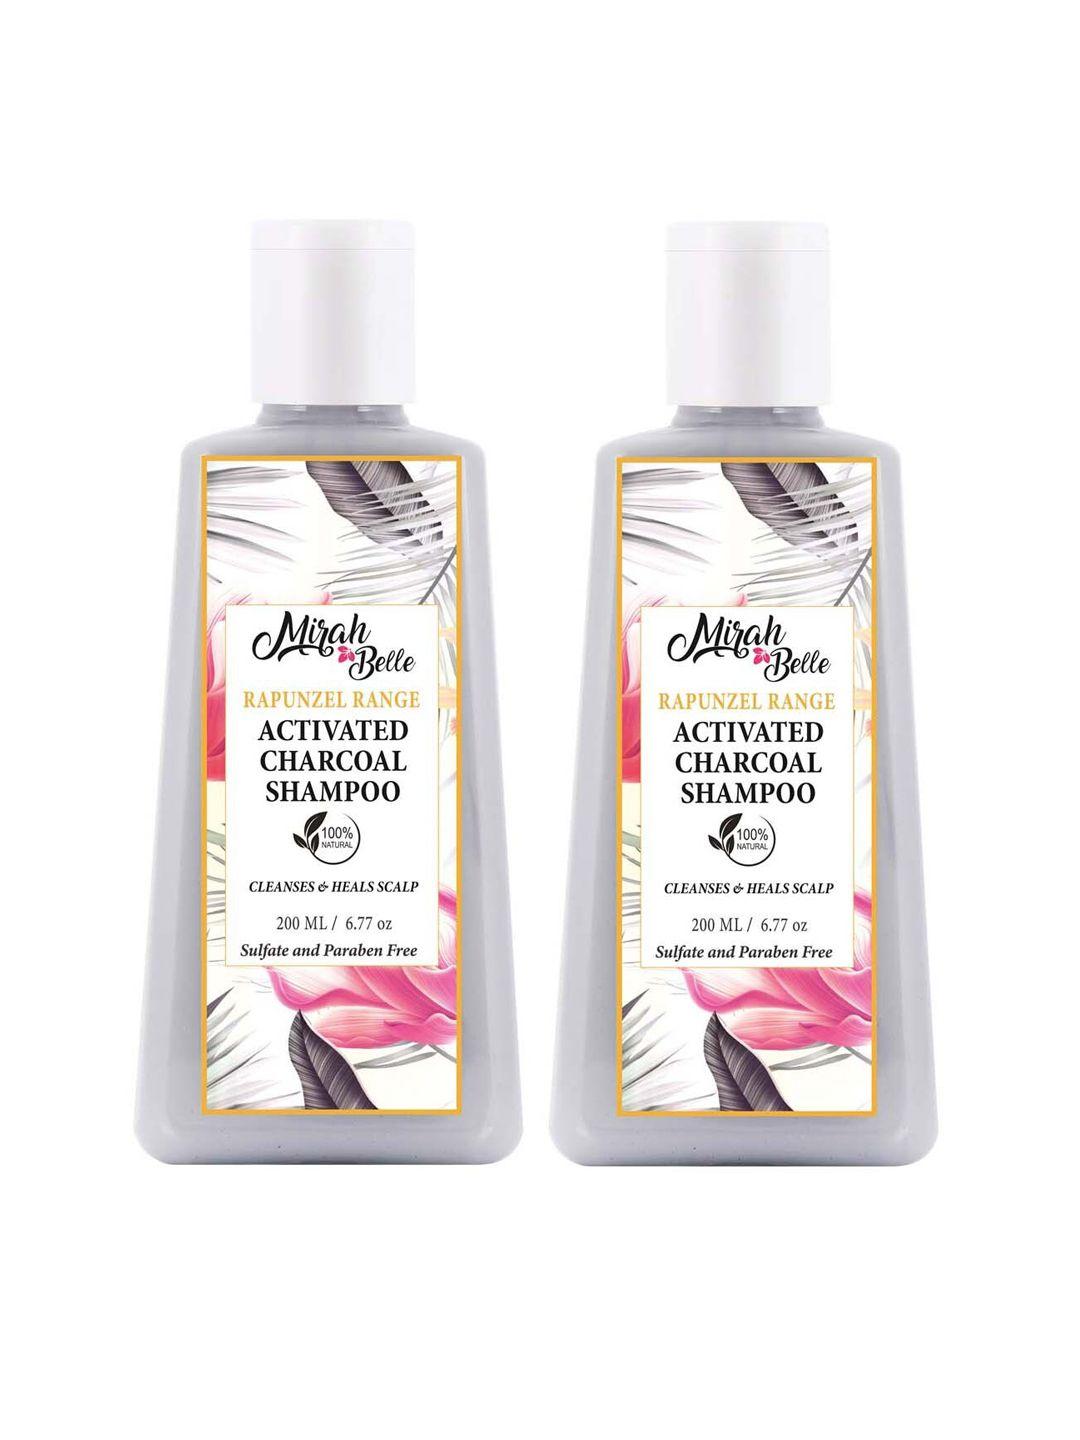 mirah belle set of 2 activated charcoal shampoo 400 ml